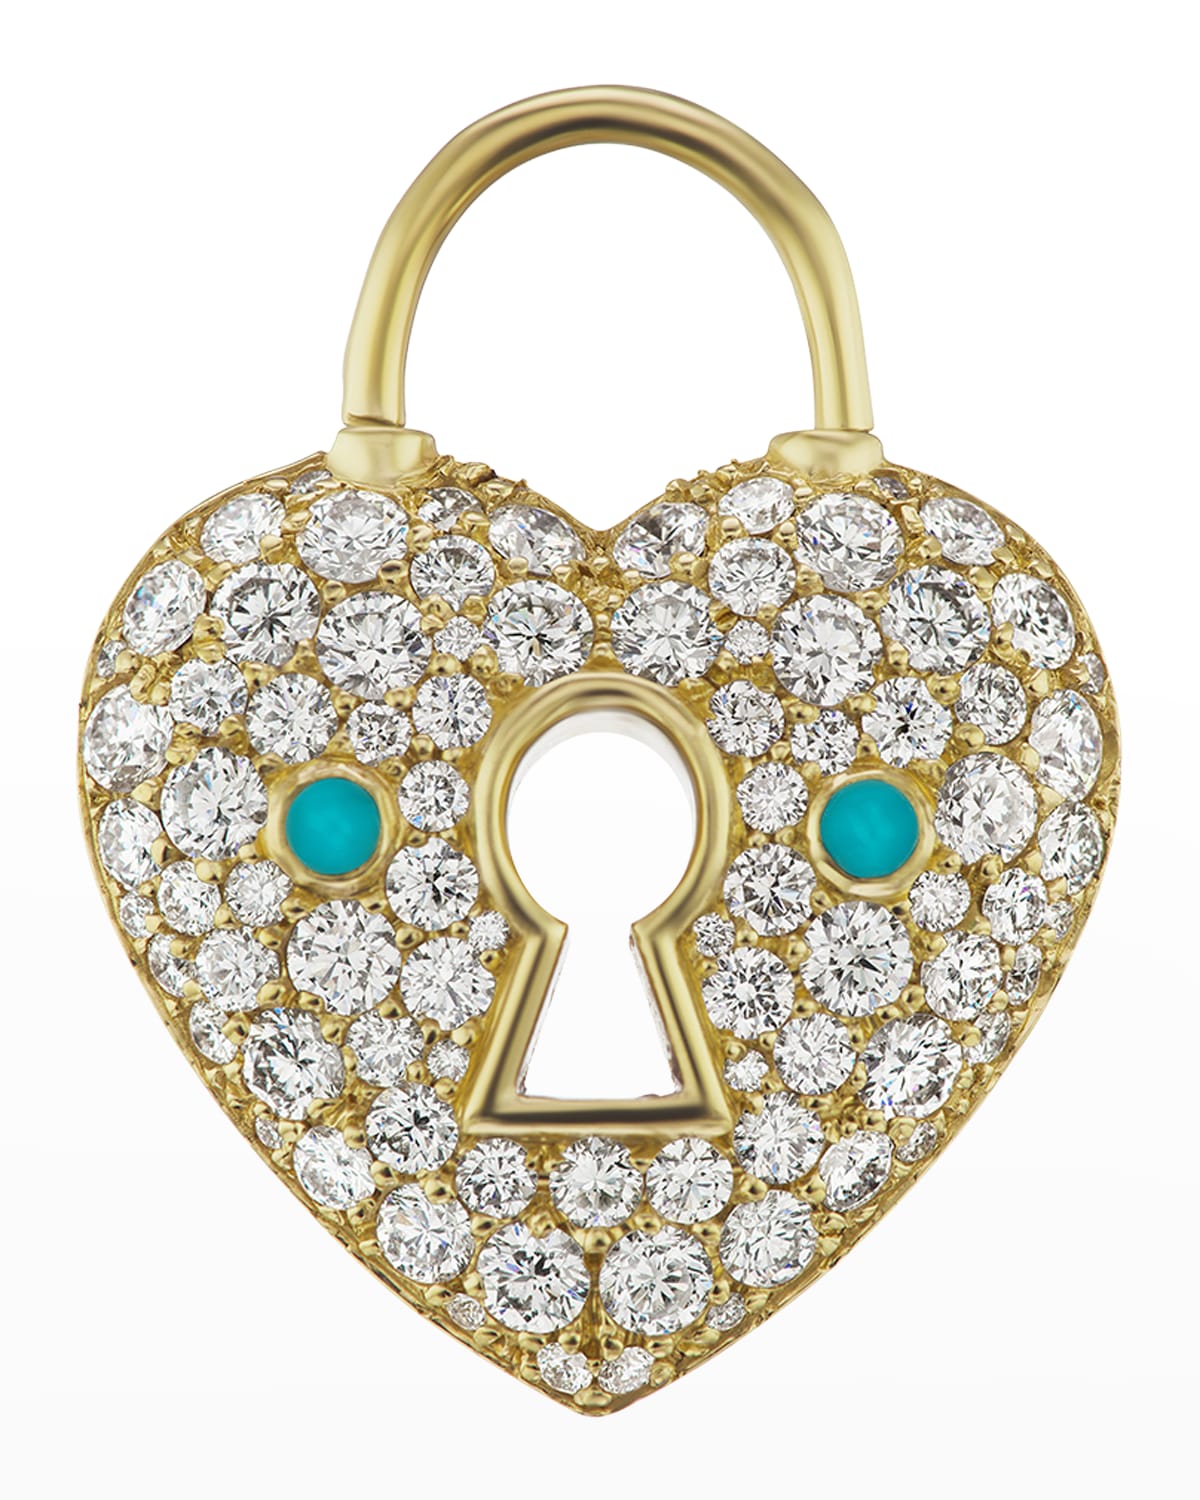 JENNA BLAKE YELLOW GOLD DIAMOND HEART CHARM WITH TURQUOISE ACCENTS